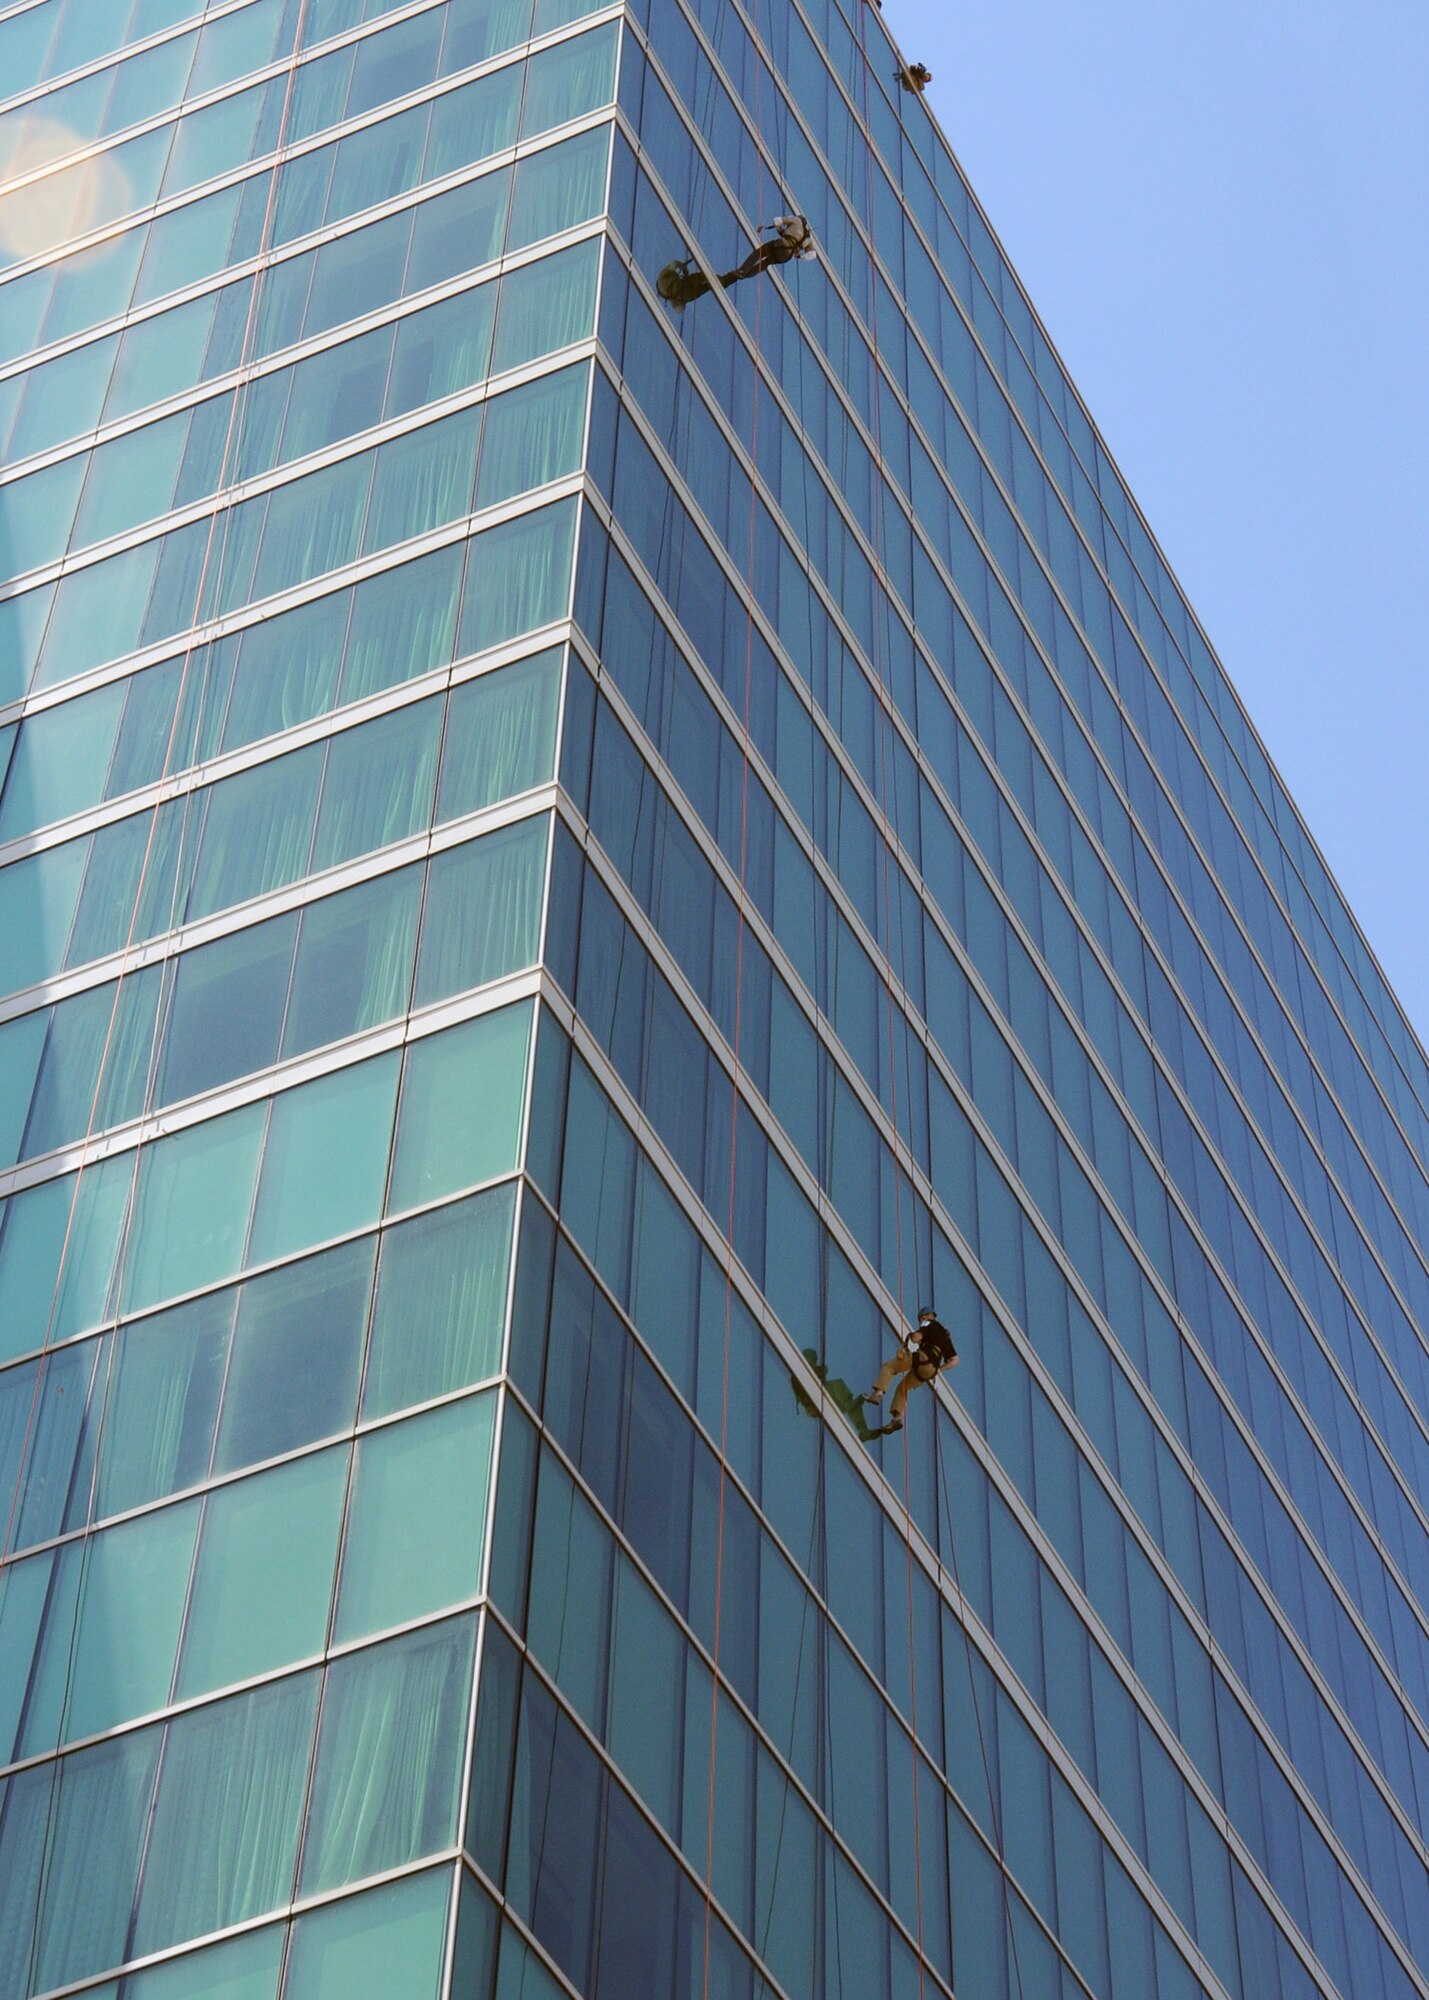 Staff Sgts. Mike Lay (l) and Tim Reynolds rappel off the 19th-story Four Seasons Hotel-Saint Louis, during the "Over the Edge" event sponsored by Special Olympics, Oct 7.  Both raised  over $1000.00 in support of Special Olympics.  Lay is an avid skydiver, while Reynolds is afraid of heights, but got over his fear to participate in the event.   The Missouri Air and Army National Guard is an official sponsor of Special Olympics.  Reynolds and Lay are members of the Security Forces of the 131st Bomb Wing, Missouri Air National Guard, at Lambert-Saint Louis,  (Photo by Master Sgt. Mary-Dale
Amison).  

